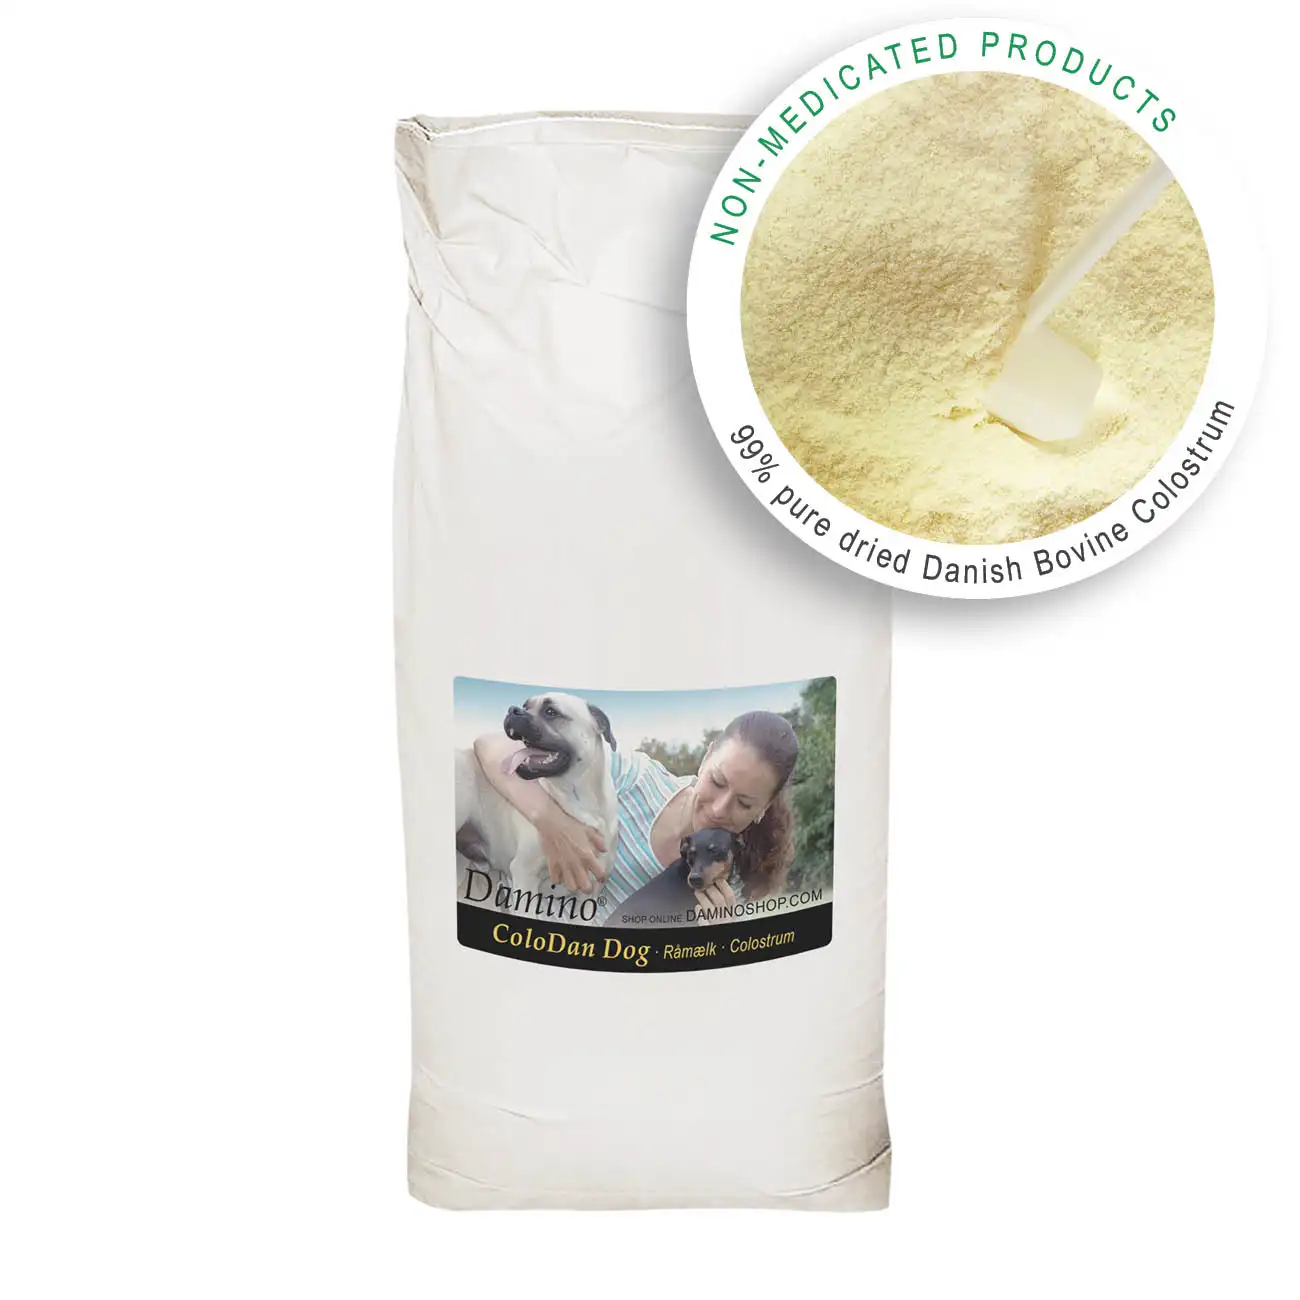 Damino Colodan Dog Naturally High Content of Immunoglobulin and Nutrients made of Dried Colostrum From Pure Danish Cows 15kg.